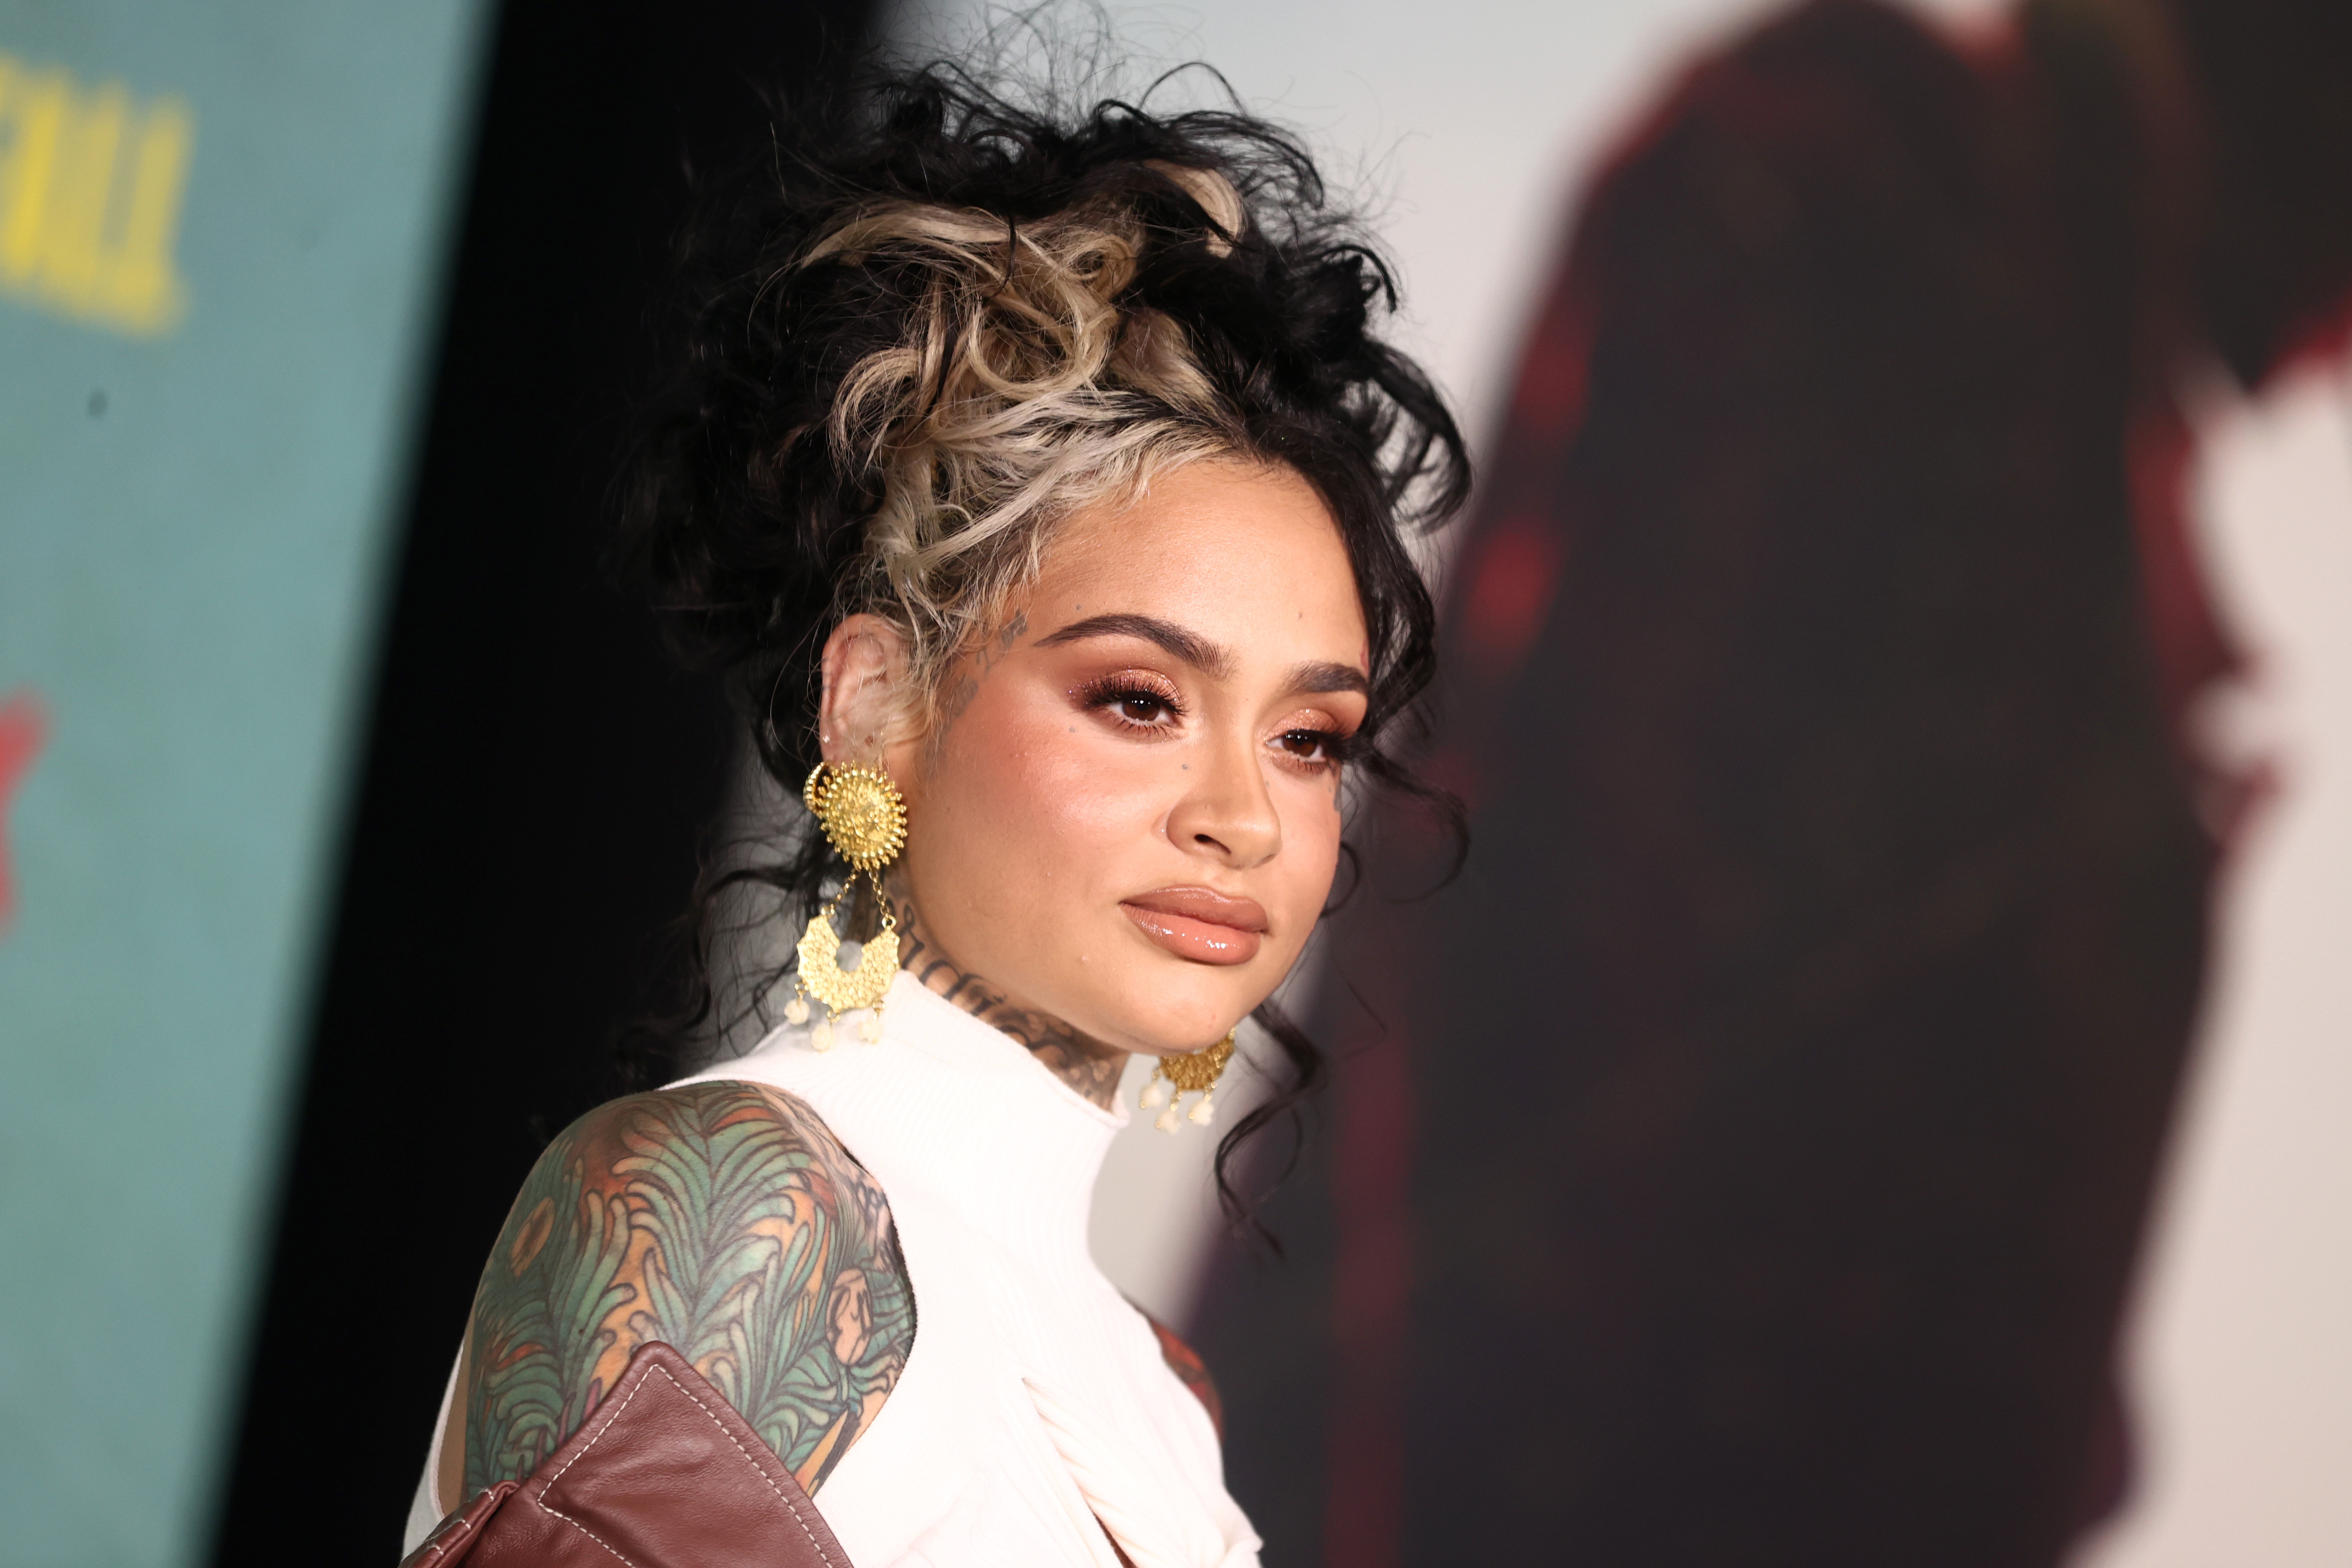 Kehlani Feels “Way More Beautiful” After Getting Breast Implants Removed